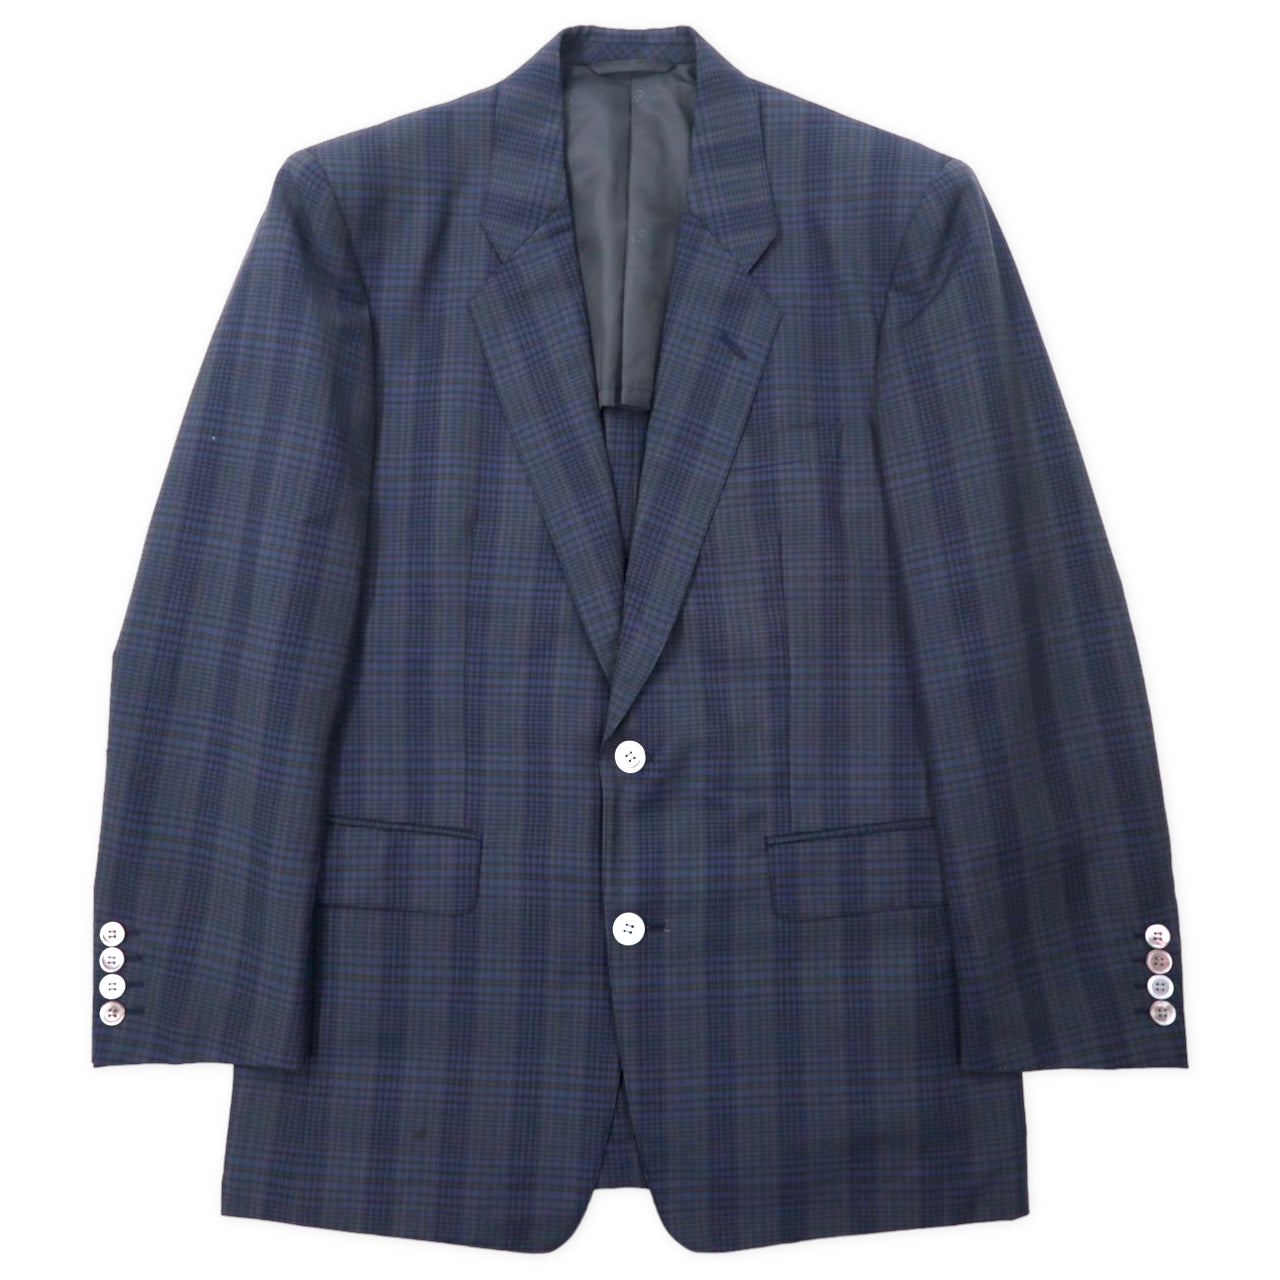 Christian Dior Monsieur 2b Tailored Jacket 91-79-170 Navy CHECKED 